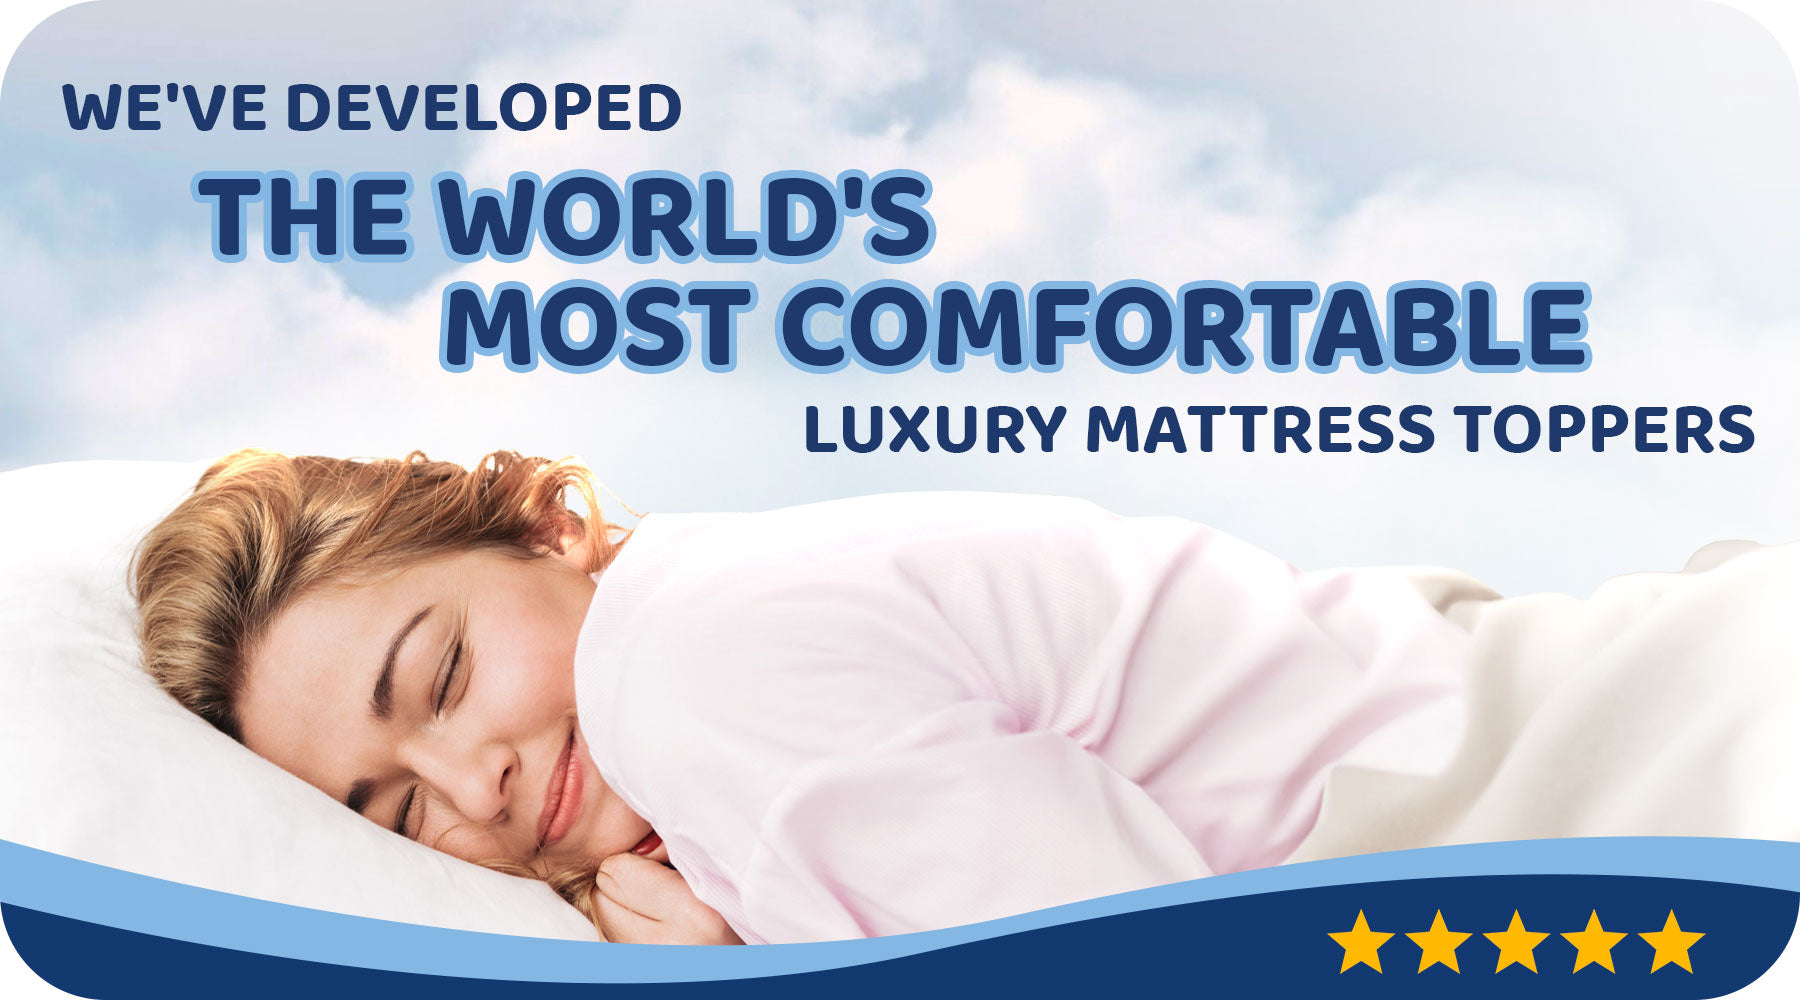 Our Seriously Comfortable luxury mattress toppers are the worlds most comfortable and 5 star quality all round